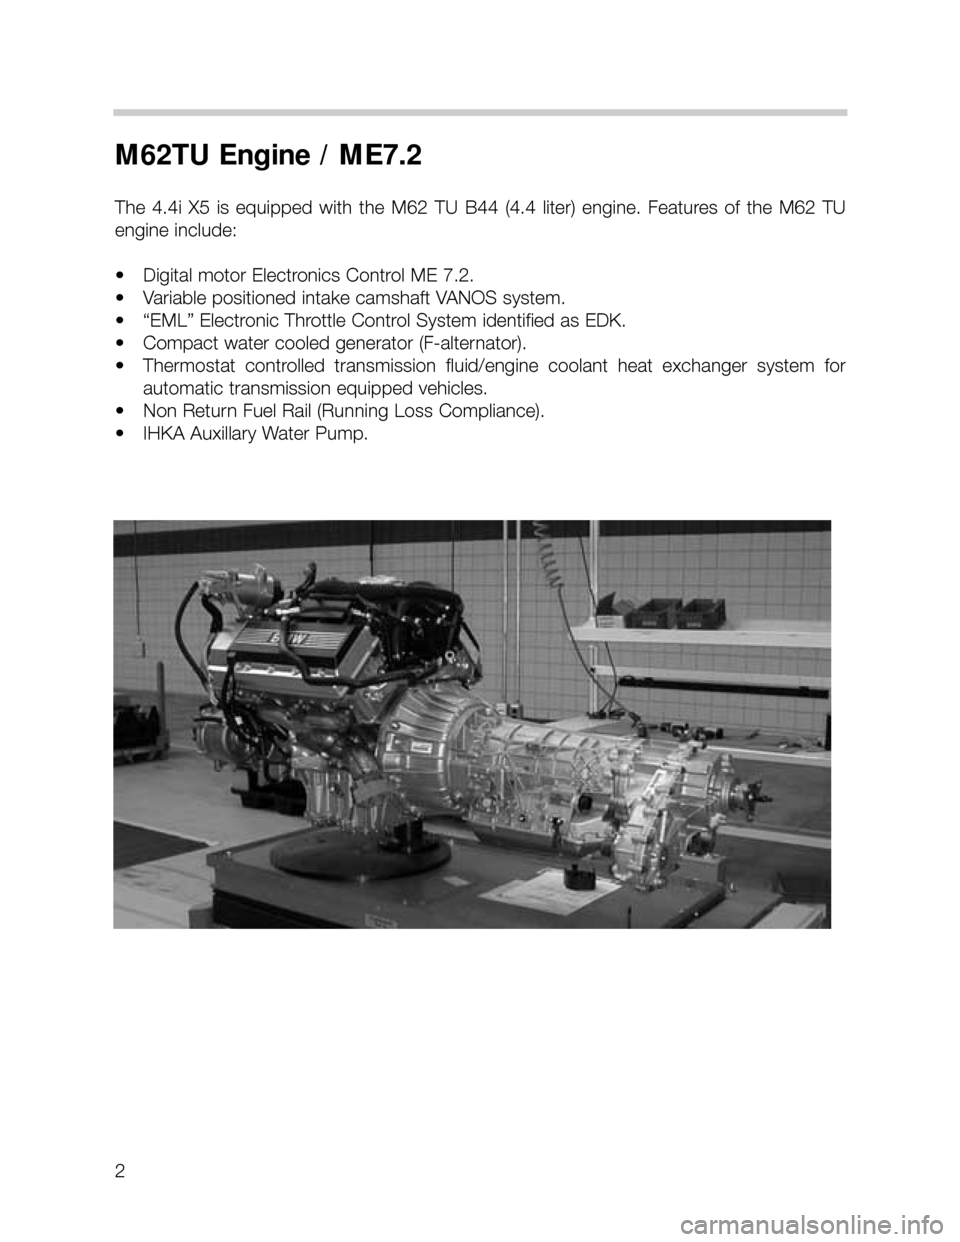 BMW X5 2004 E53 M62TU Engine Workshop Manual 2
M62TU Engine / ME7.2
The 4.4i X5 is equipped  with  the  M62  TU  B44  (4.4  liter)  engine.  Features  of  the  M62  TU
engine include:
• Digital motor Electronics Control ME 7.2.
• Variable po